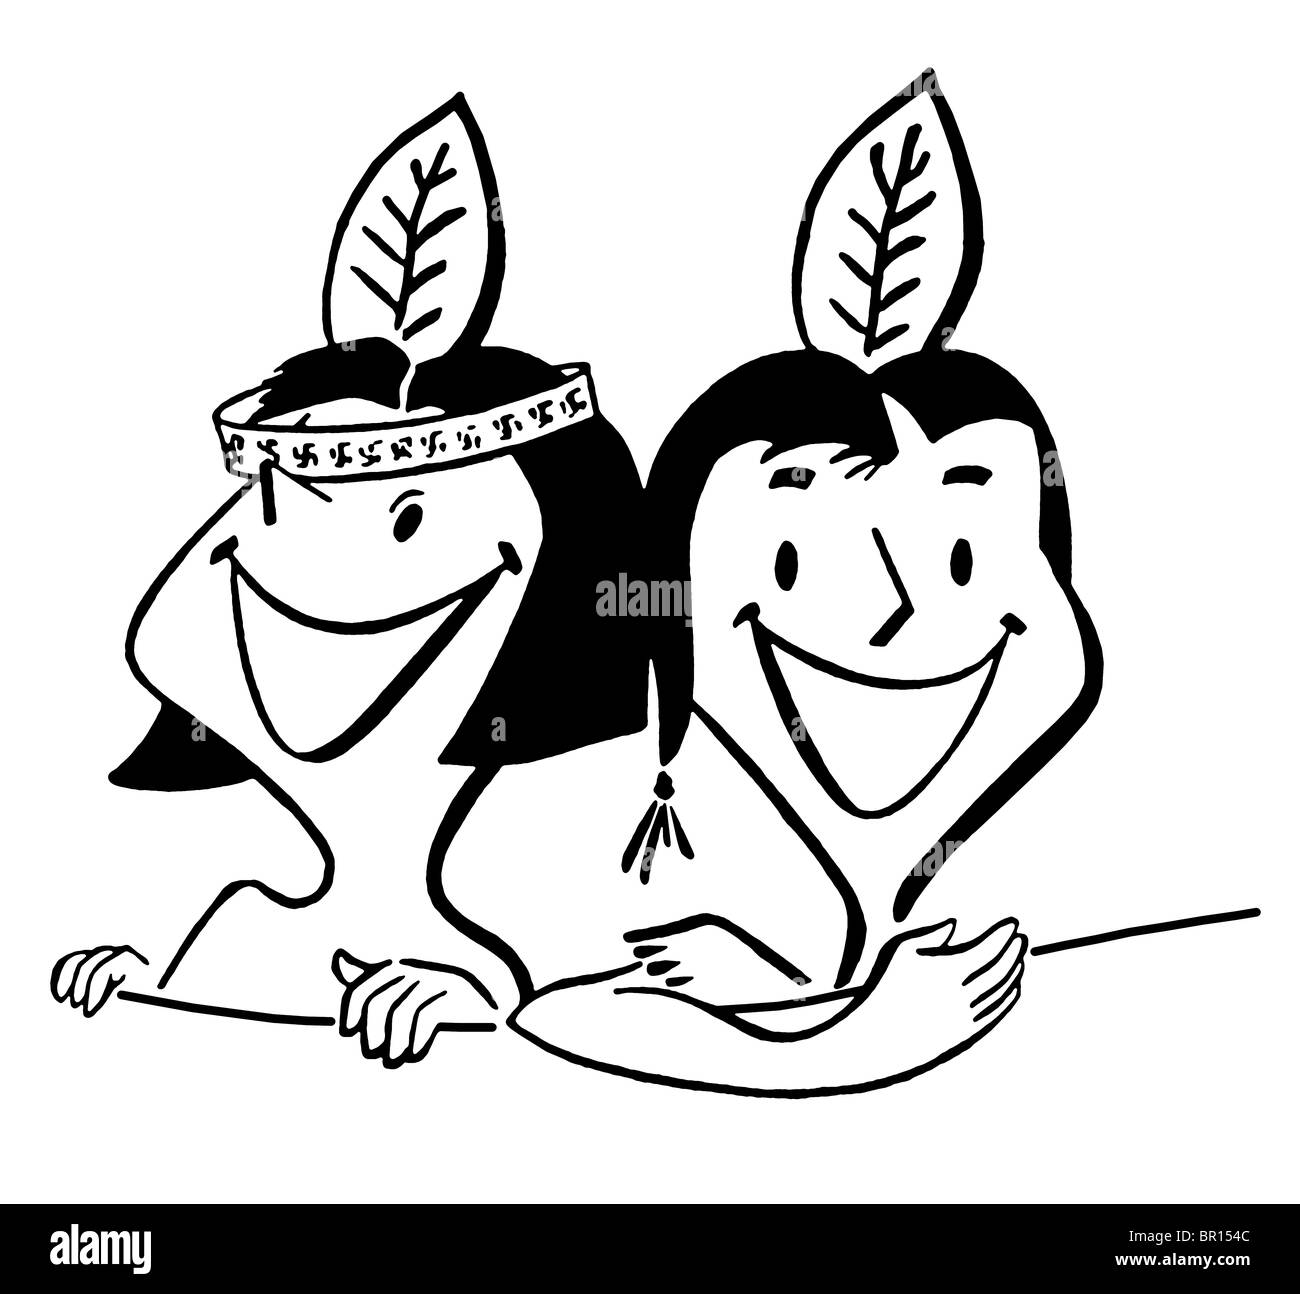 A black and white version of a cartoon style vintage illustration of two young children Stock Photo